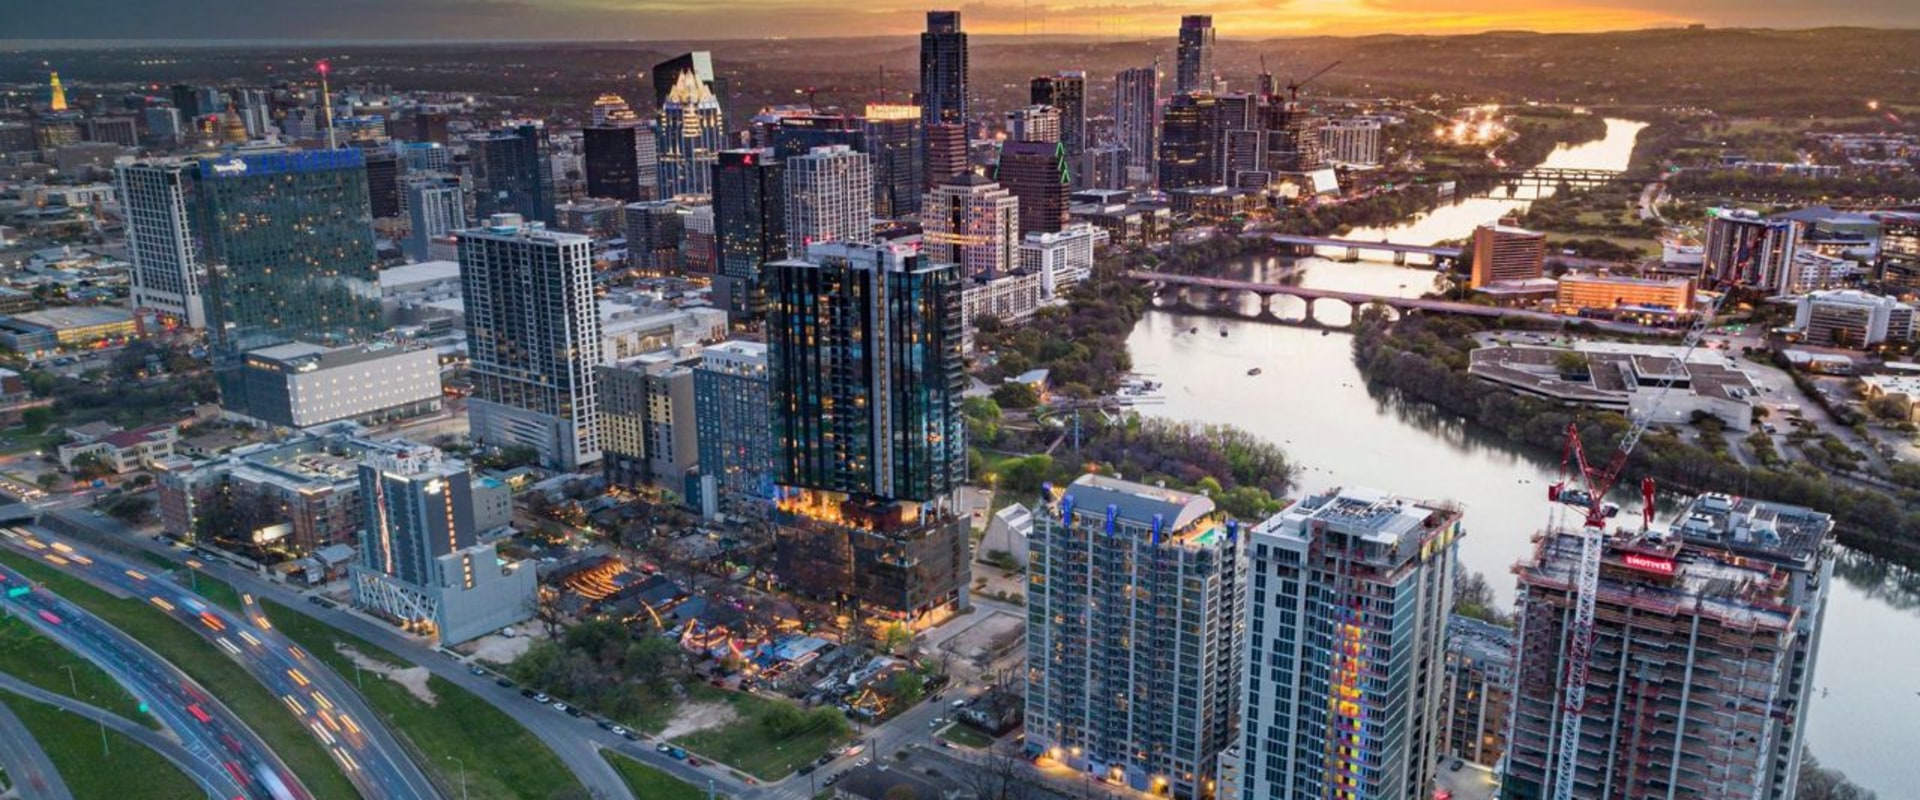 Is austin one of the most expensive cities?